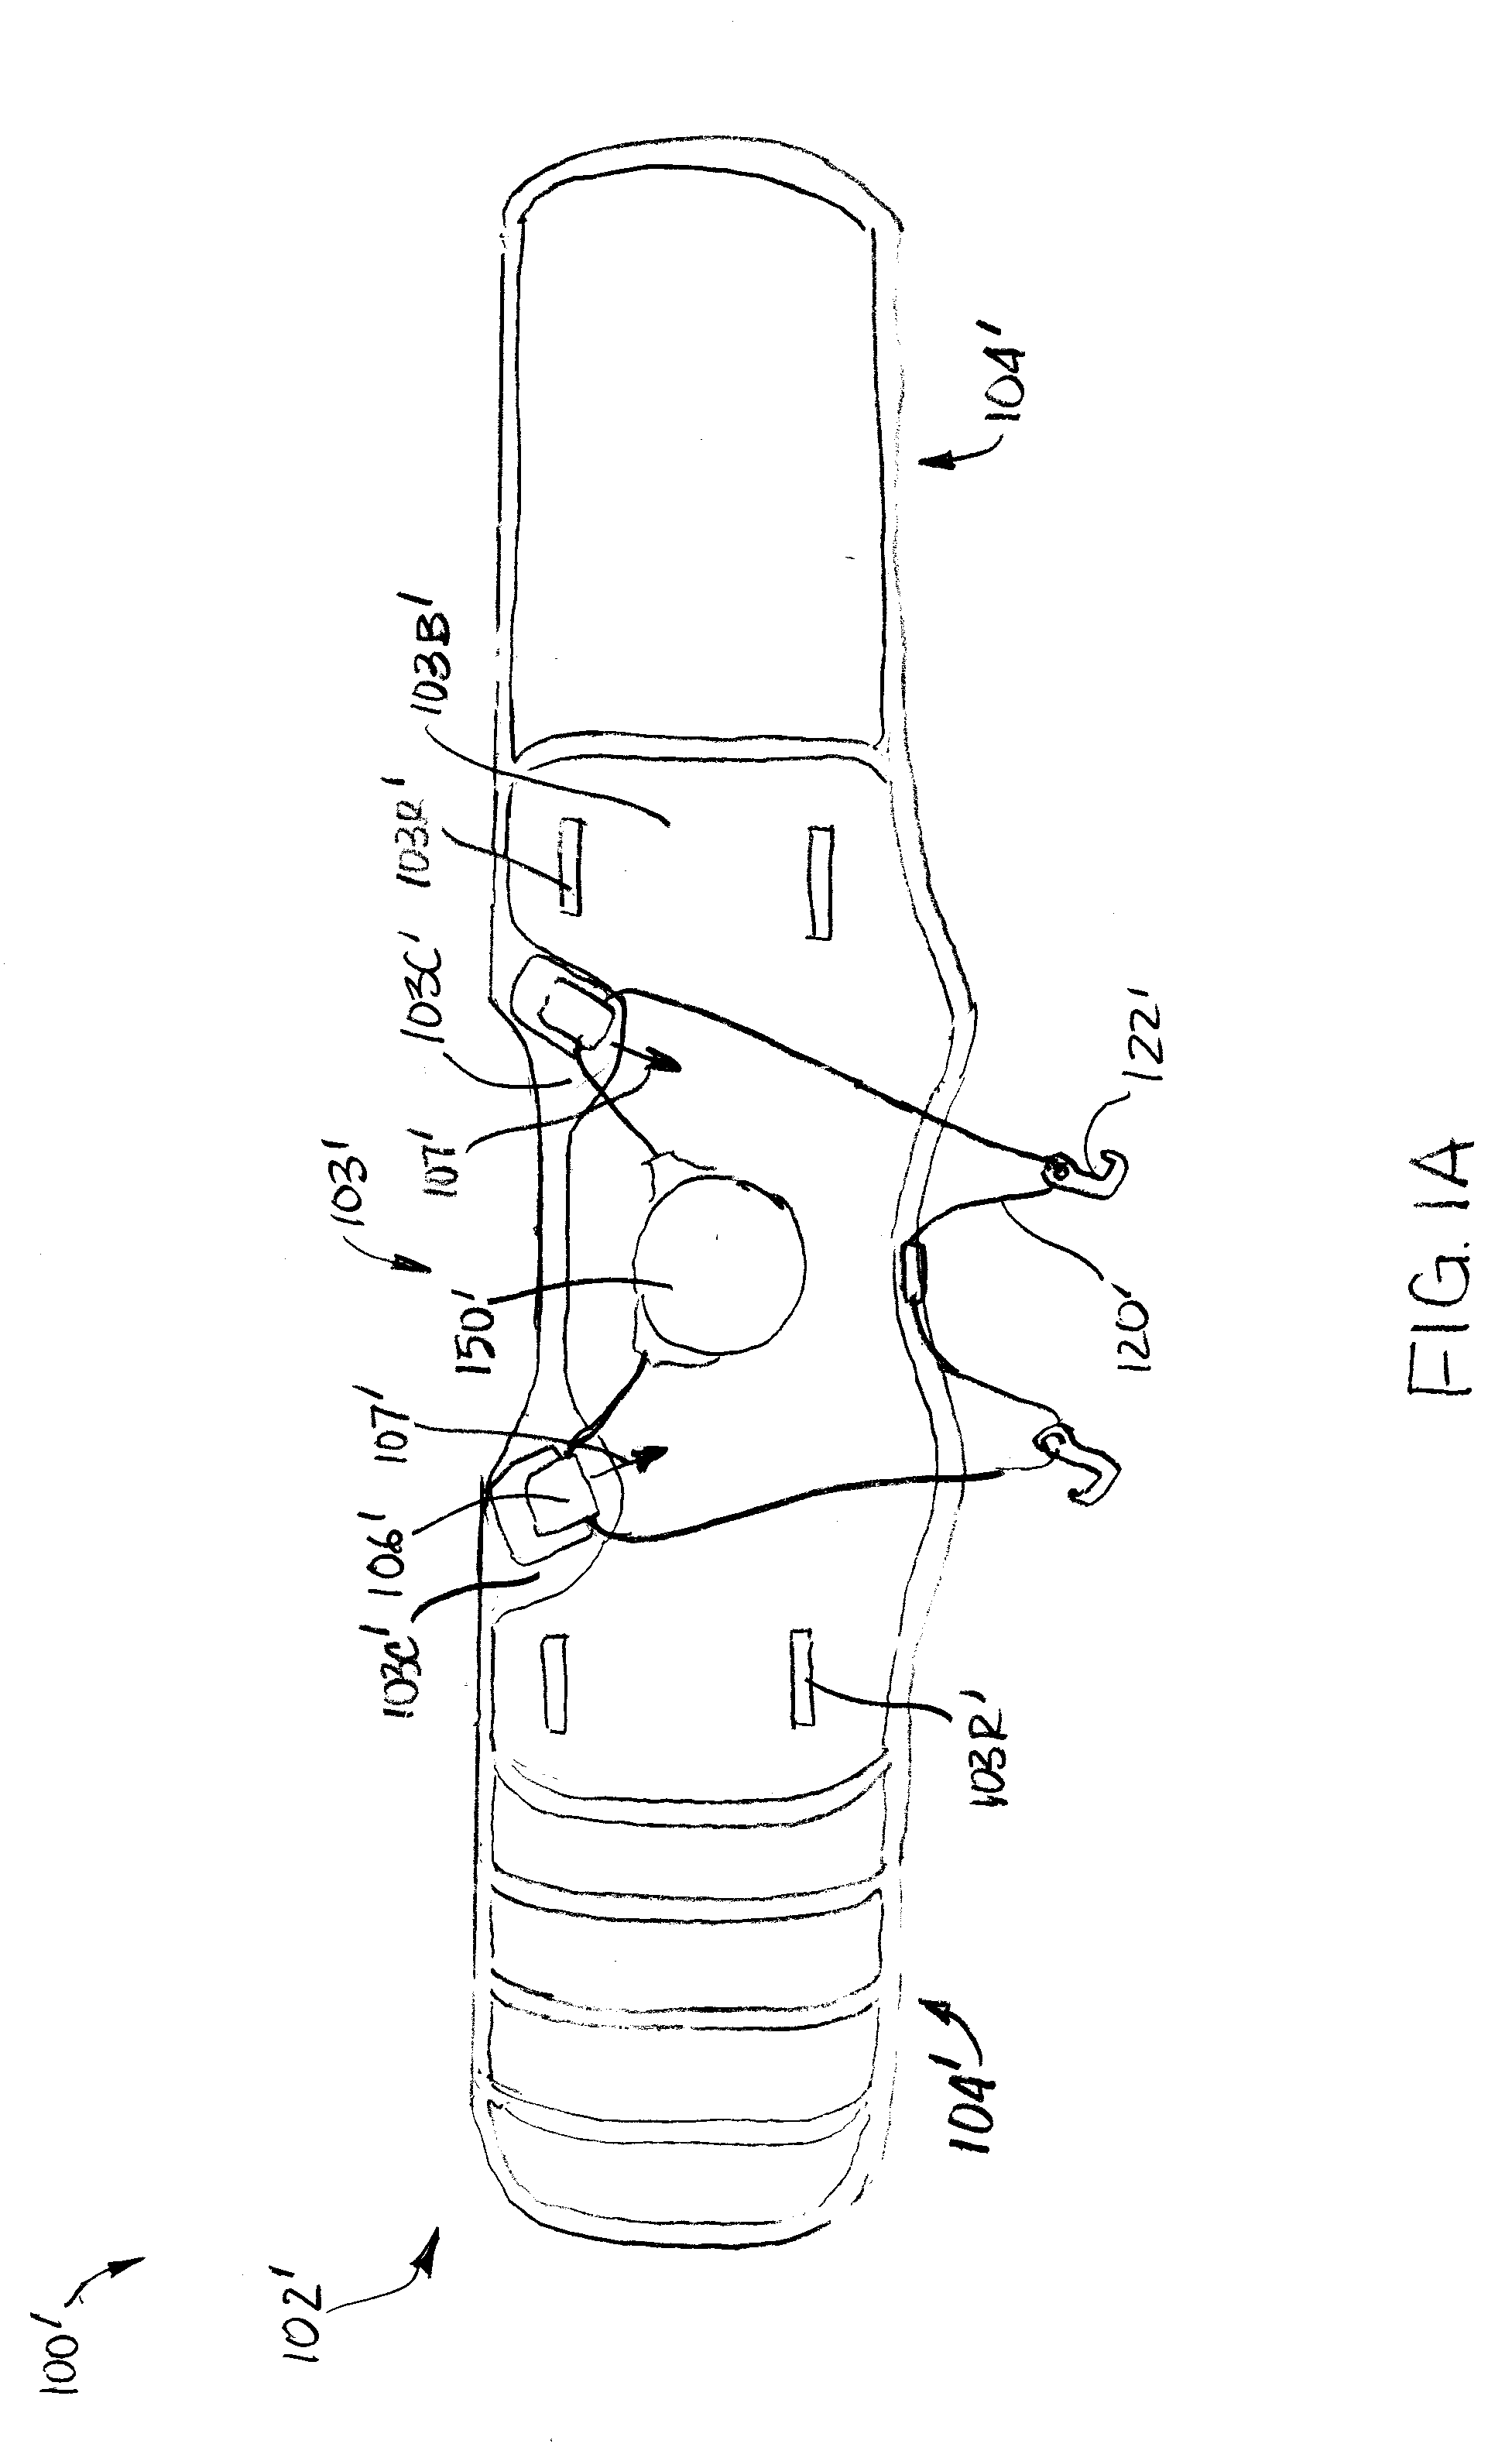 Orthosis, system and methods for addressing foot drop